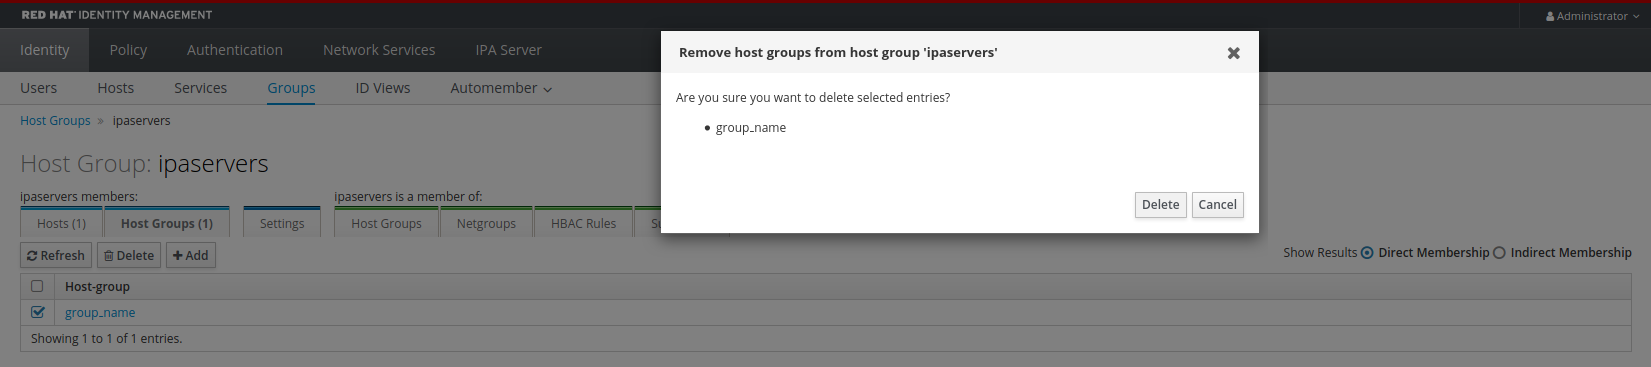 A screenshot of a pop-up window titled "Remove host groups from host group ipaservers." The content says "Are you sure you want to delete the selected entries" and "group_name" below that. There are "Delete" and "Cancel" buttons at the bottom right corner of the window.